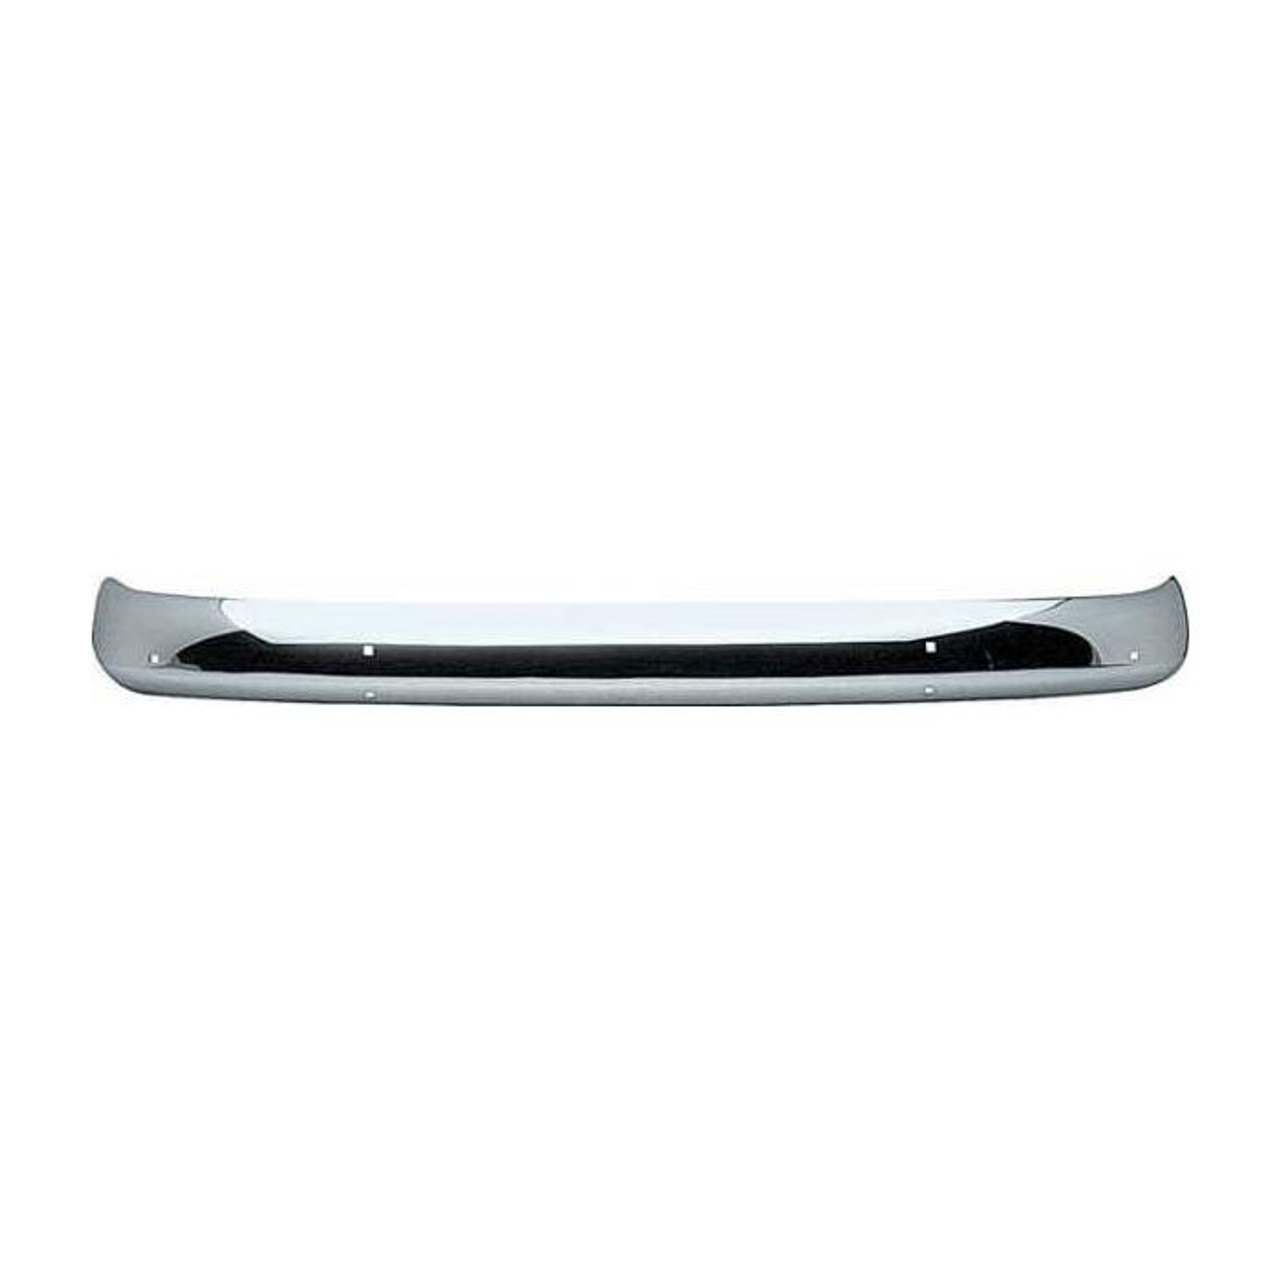 1955-1959 Chevy/GMC Truck Front Bumper. Chrome without License Plate Bracket Holes.